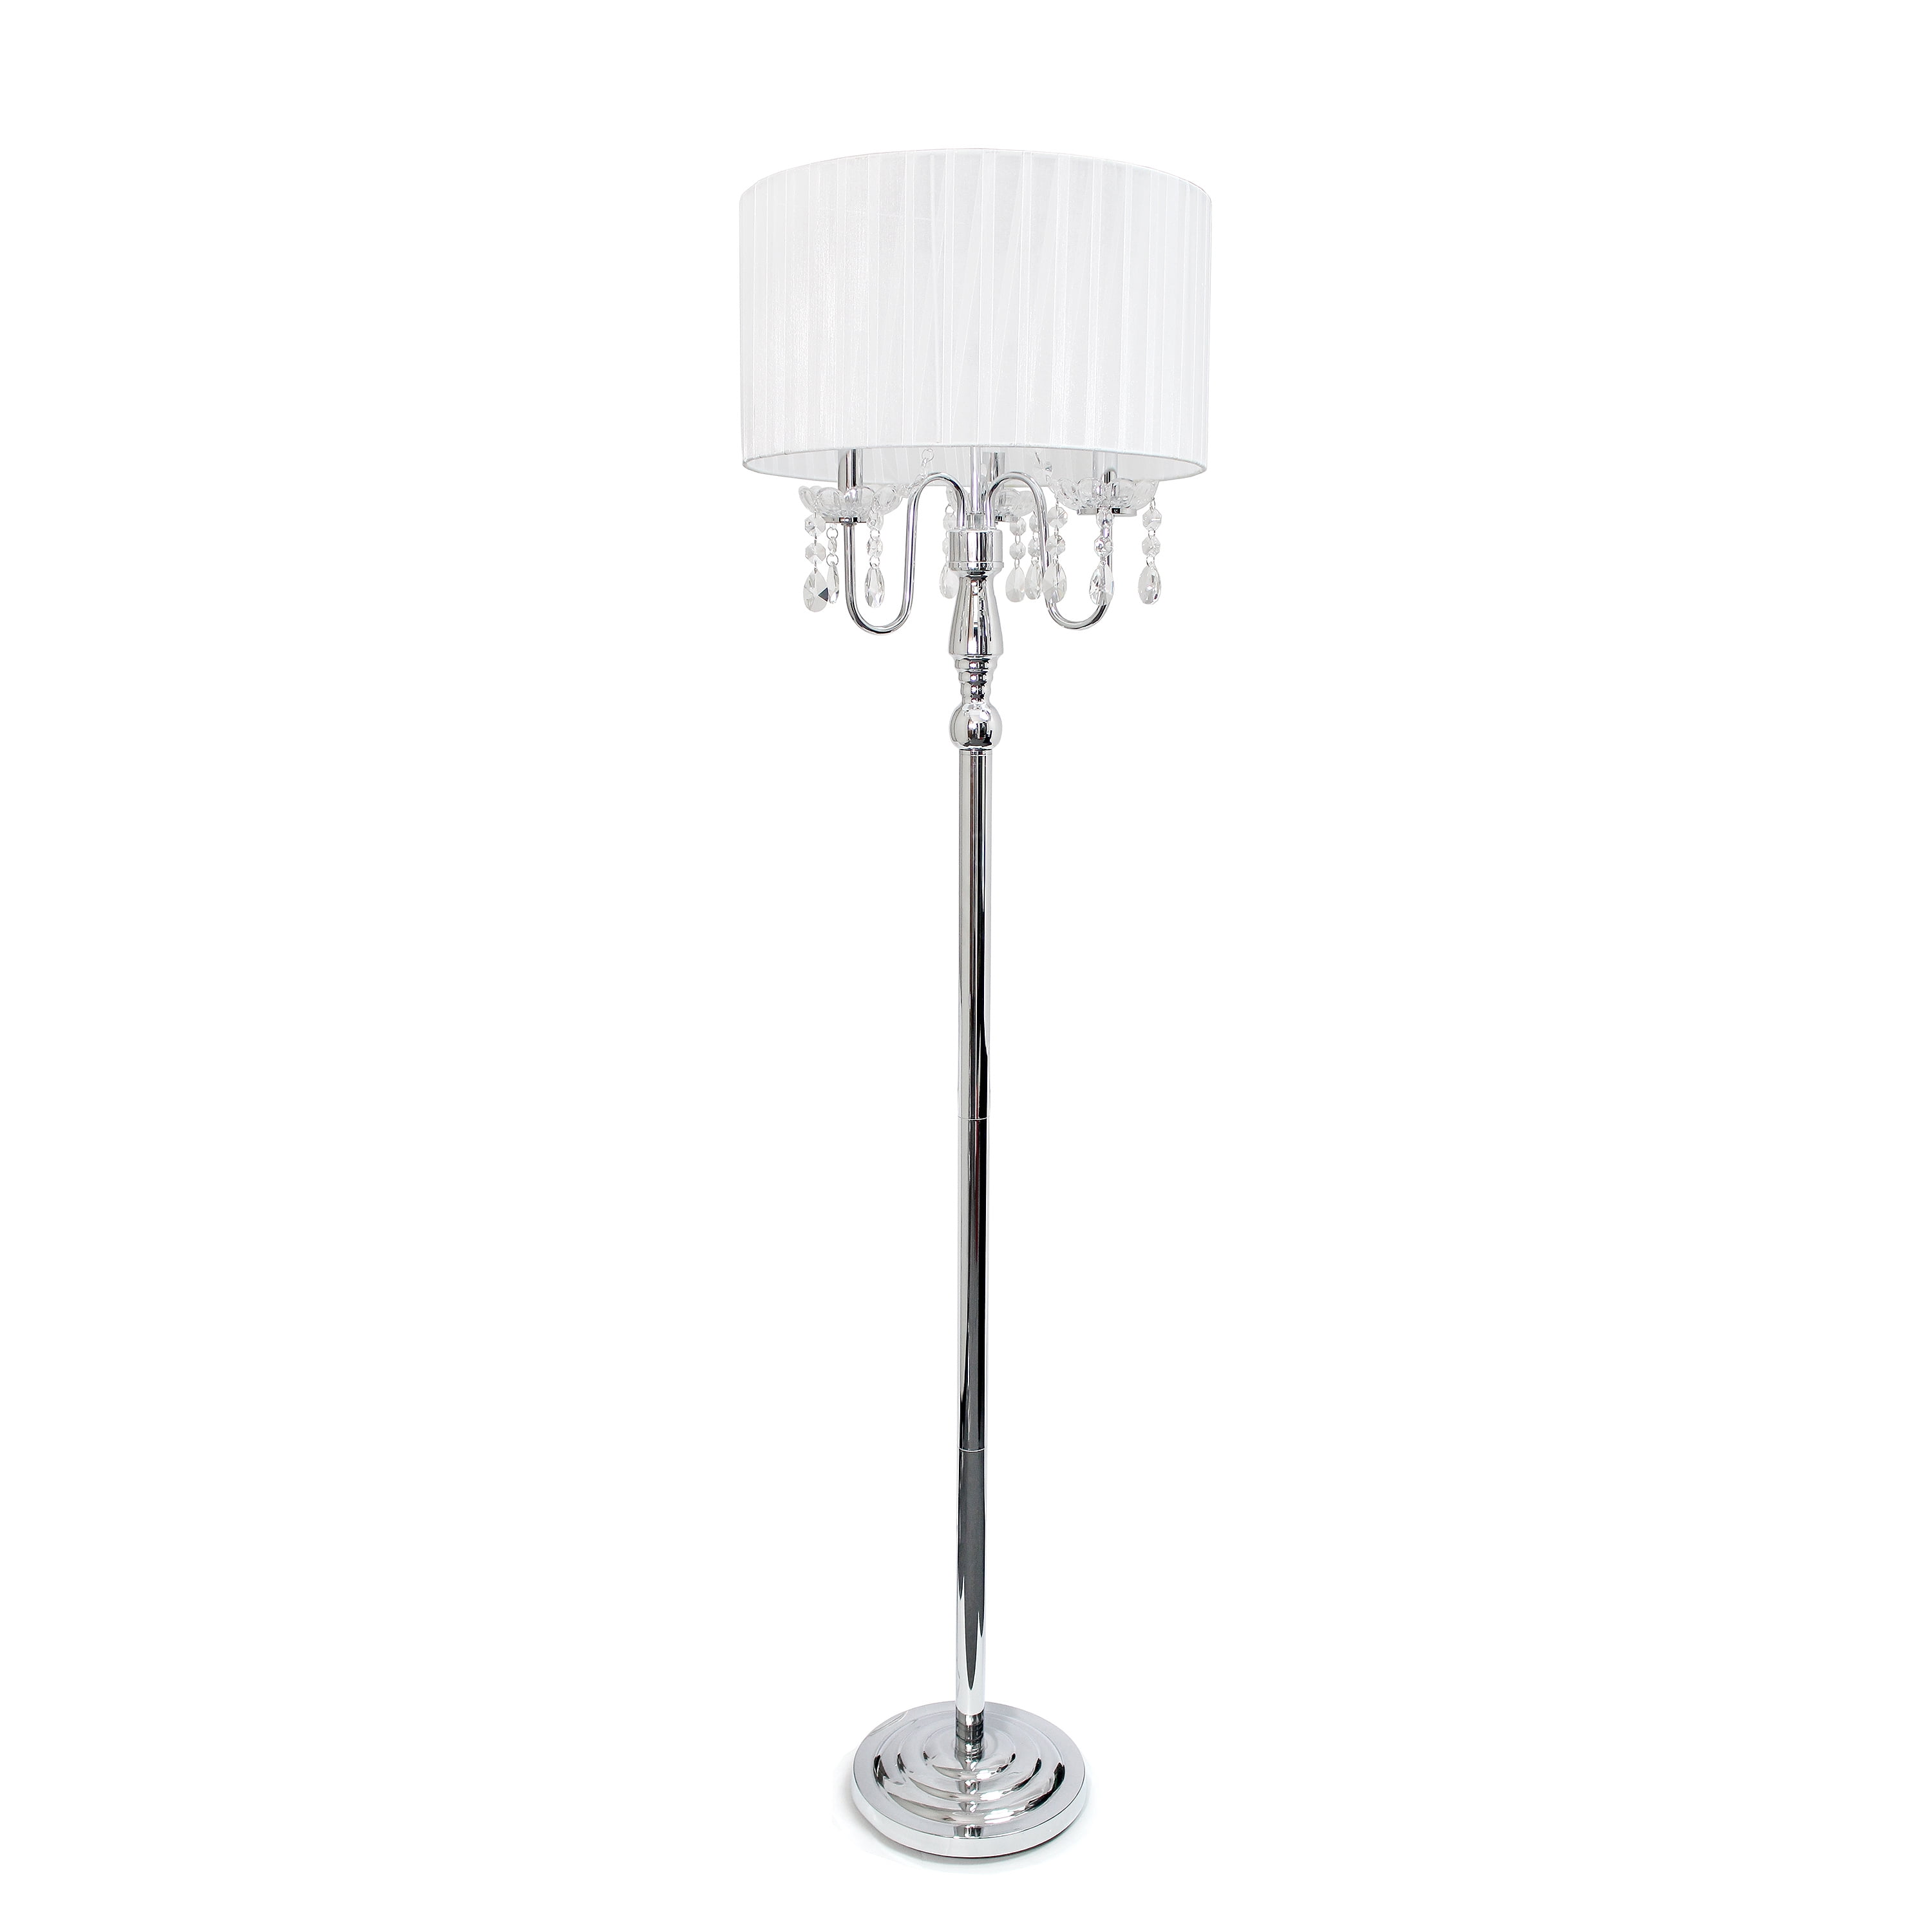 Trendy Romantic Sheer Shade Floor Lamp, Ore International 20 25 In Silver Chandelier Table Lamp With Crystal Shade